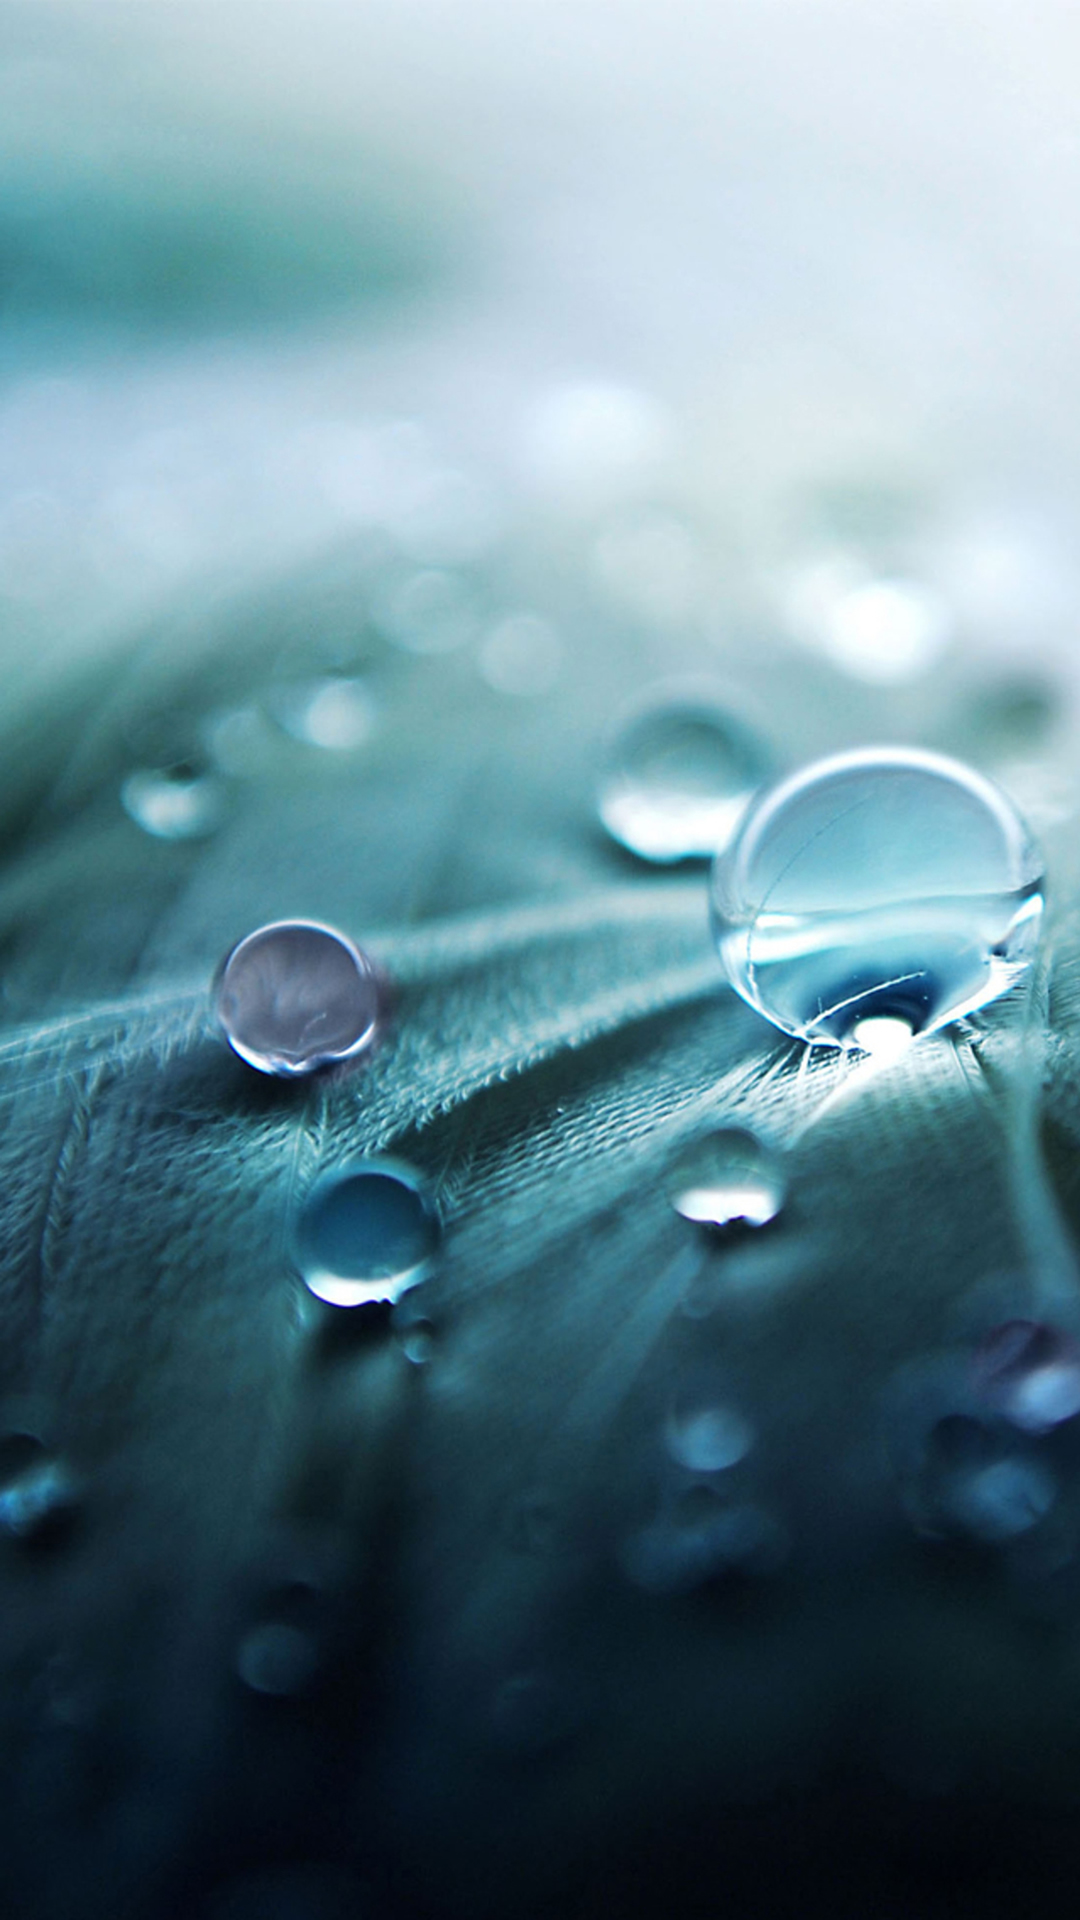 droplet iPhone 6 Wallpapers | iPhone Wallpapers, iPad wallpapers ...